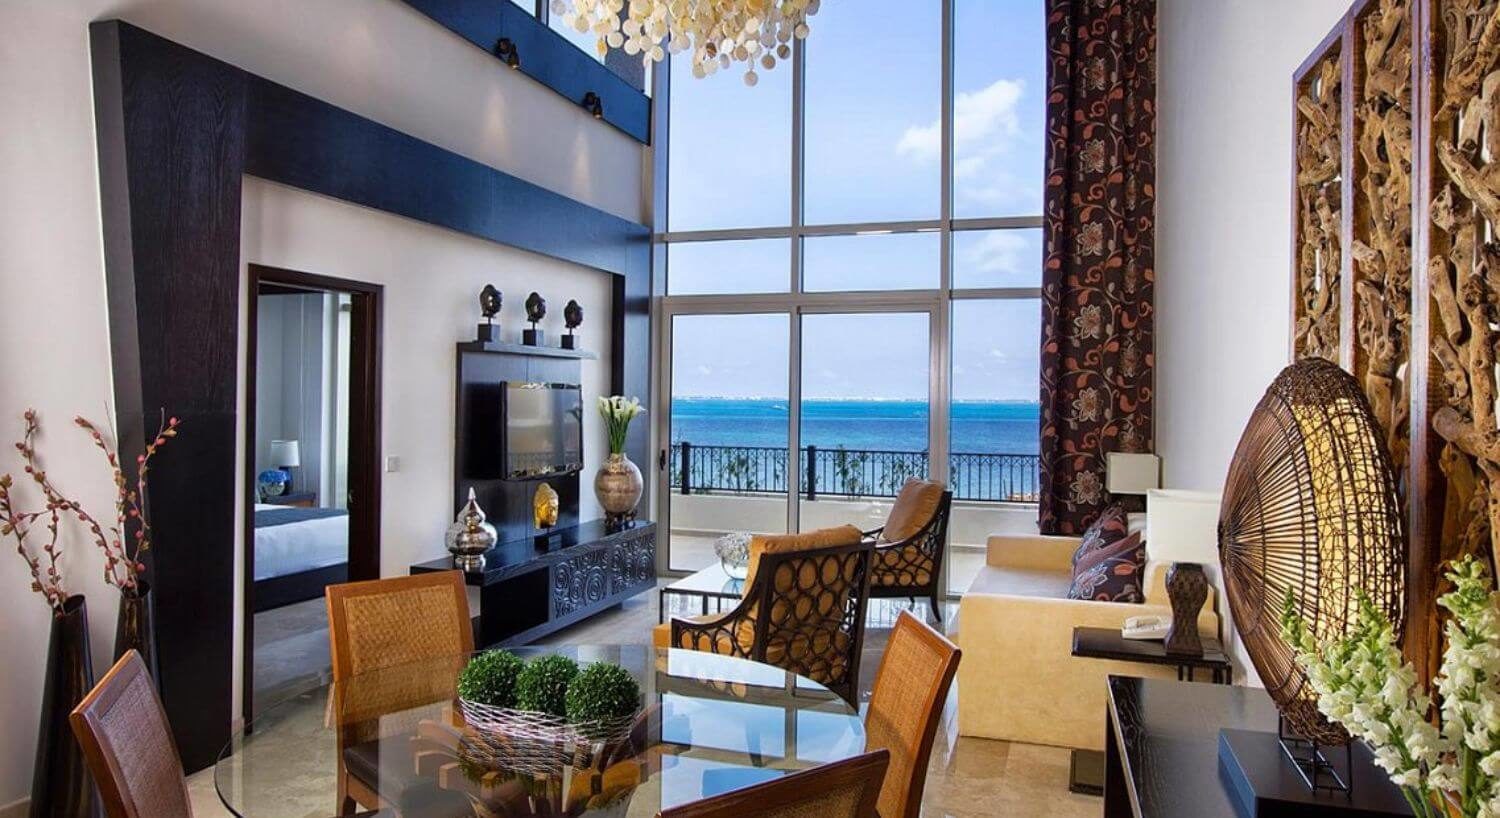 An elegant living room and dining area with comfortable plush sofa and chairs, an ornate dresser with a flat screen TV on the wall, a round glass dining table and chairs, an open door to a bedroom displaying part of a bed, and multi story floor-to-ceiling windows with sliding doors opening out to a terrace with beautiful ocean views.